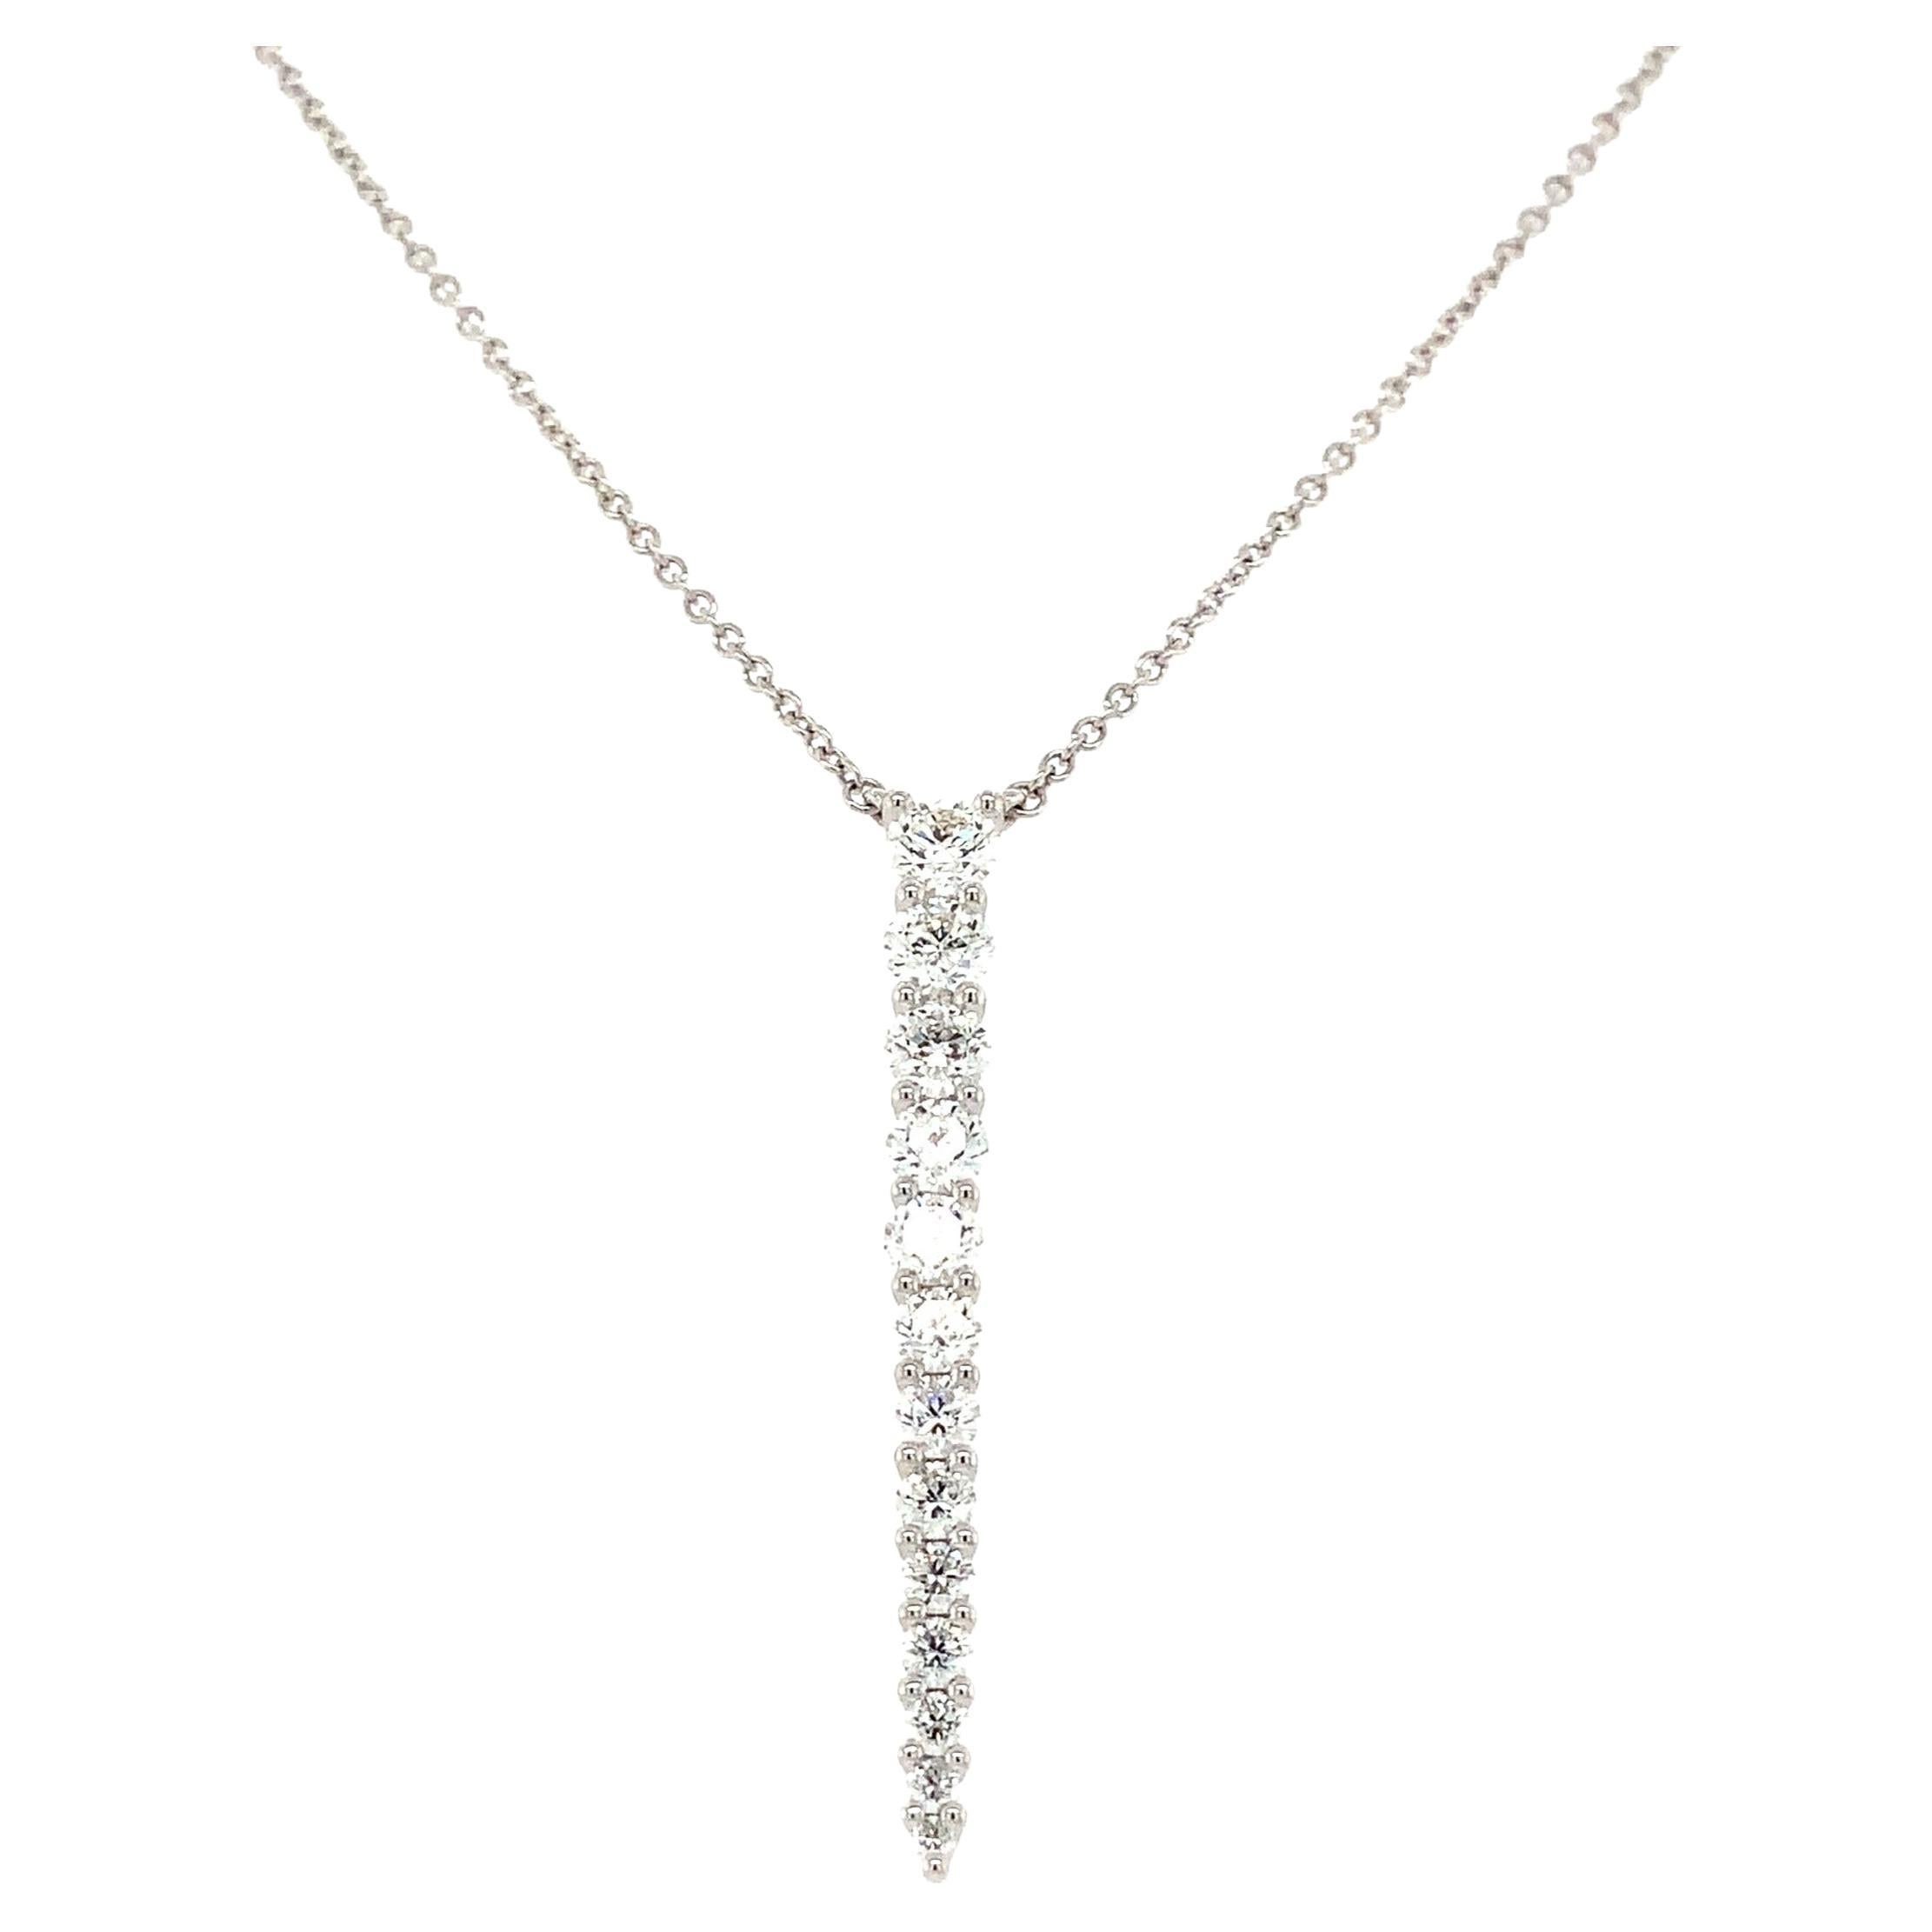 Memoire Identity Collection Diamond Pendant Set in 18k White Gold 1.20 Carats to